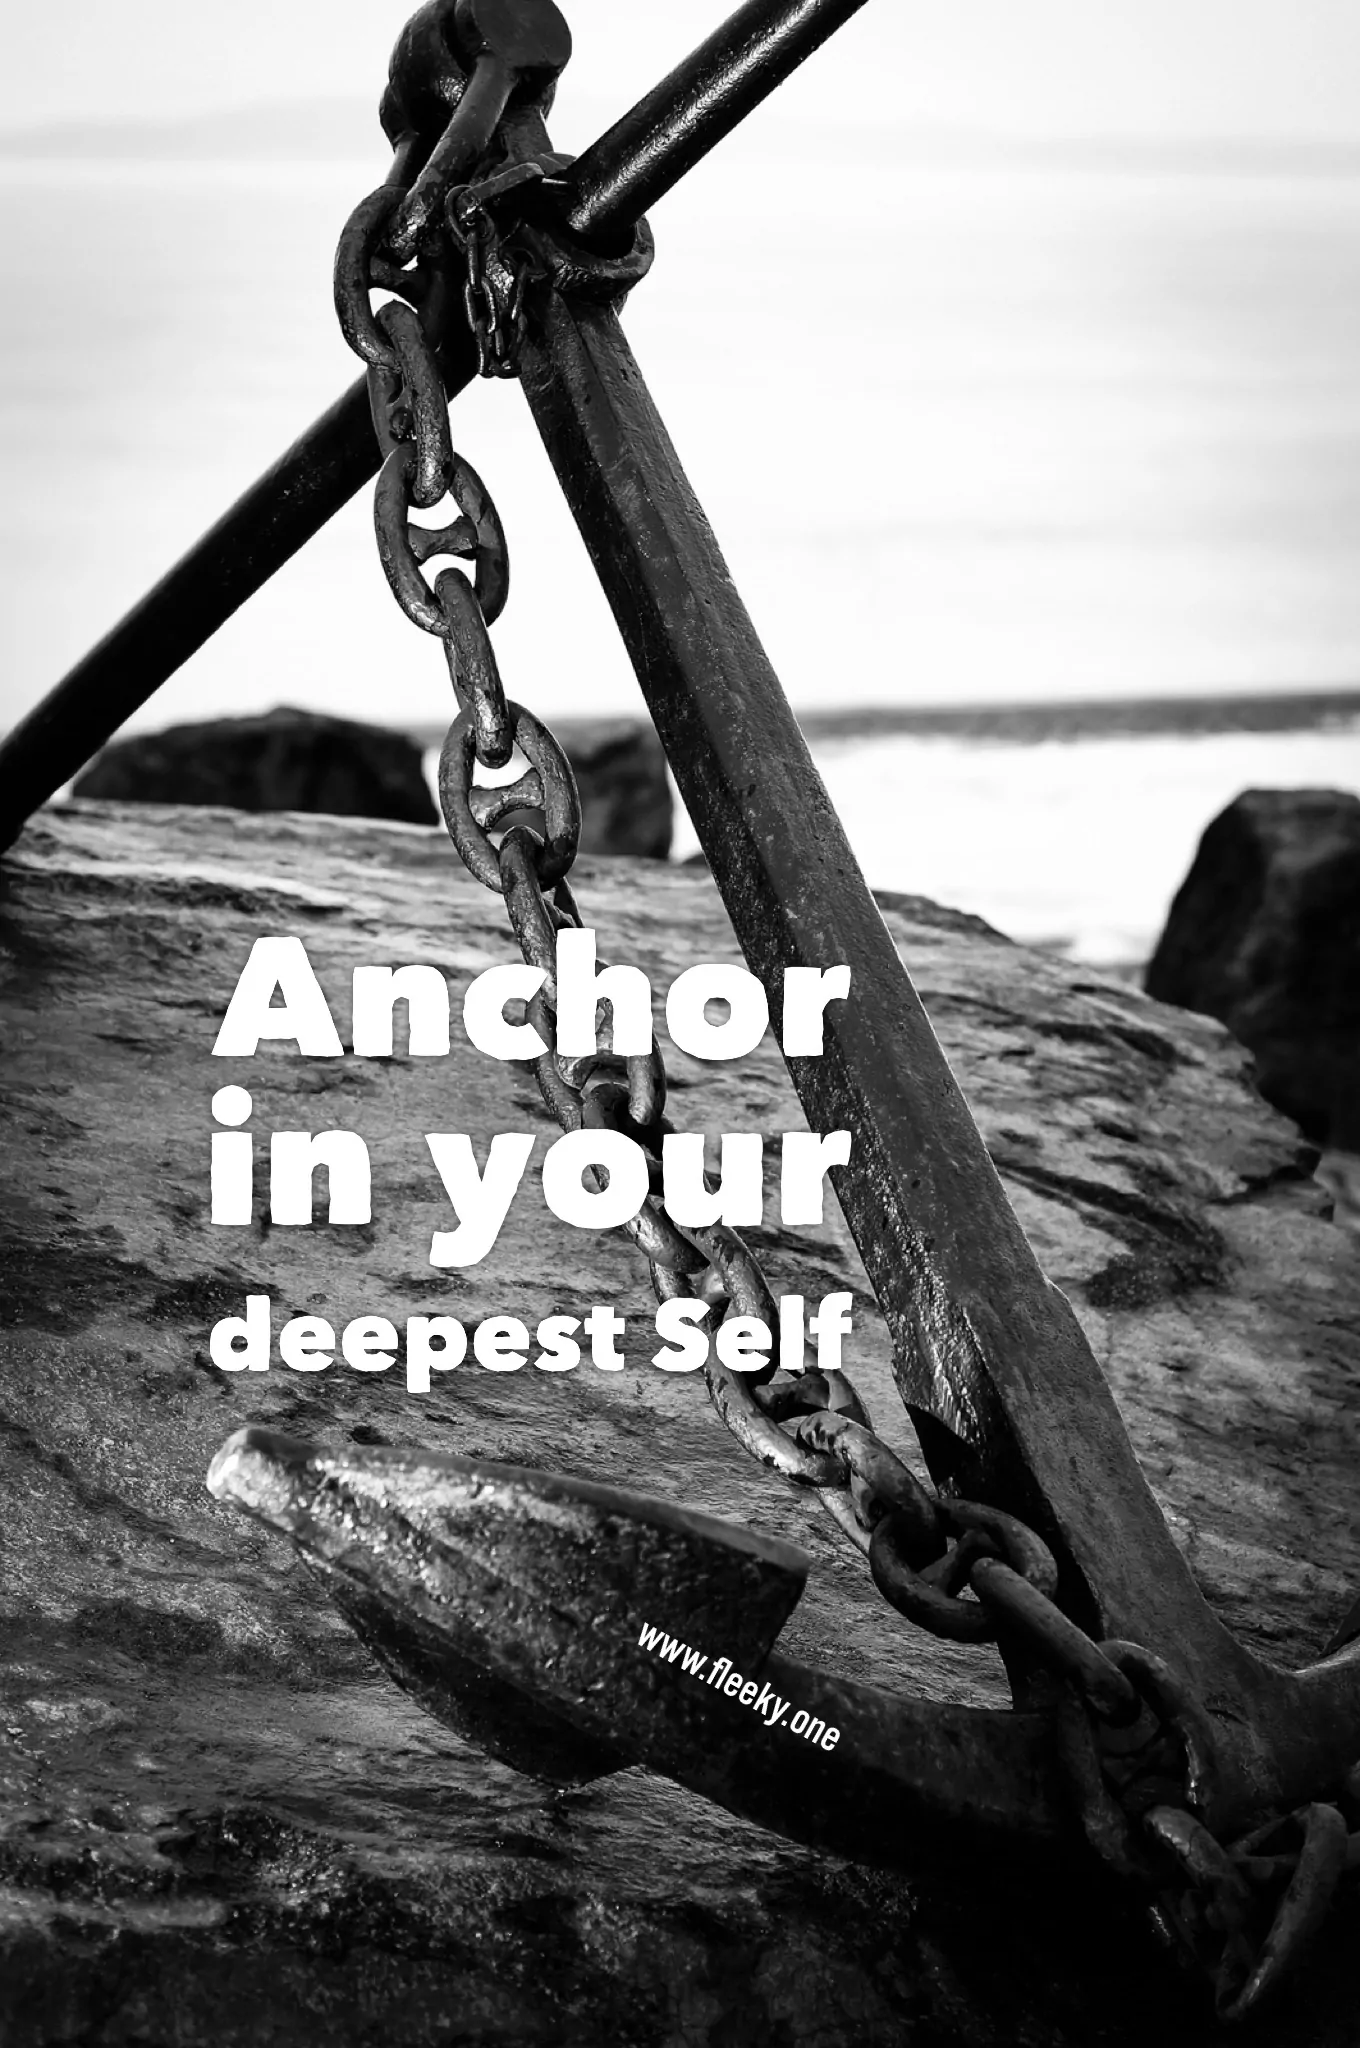 Anchor in your deepest self